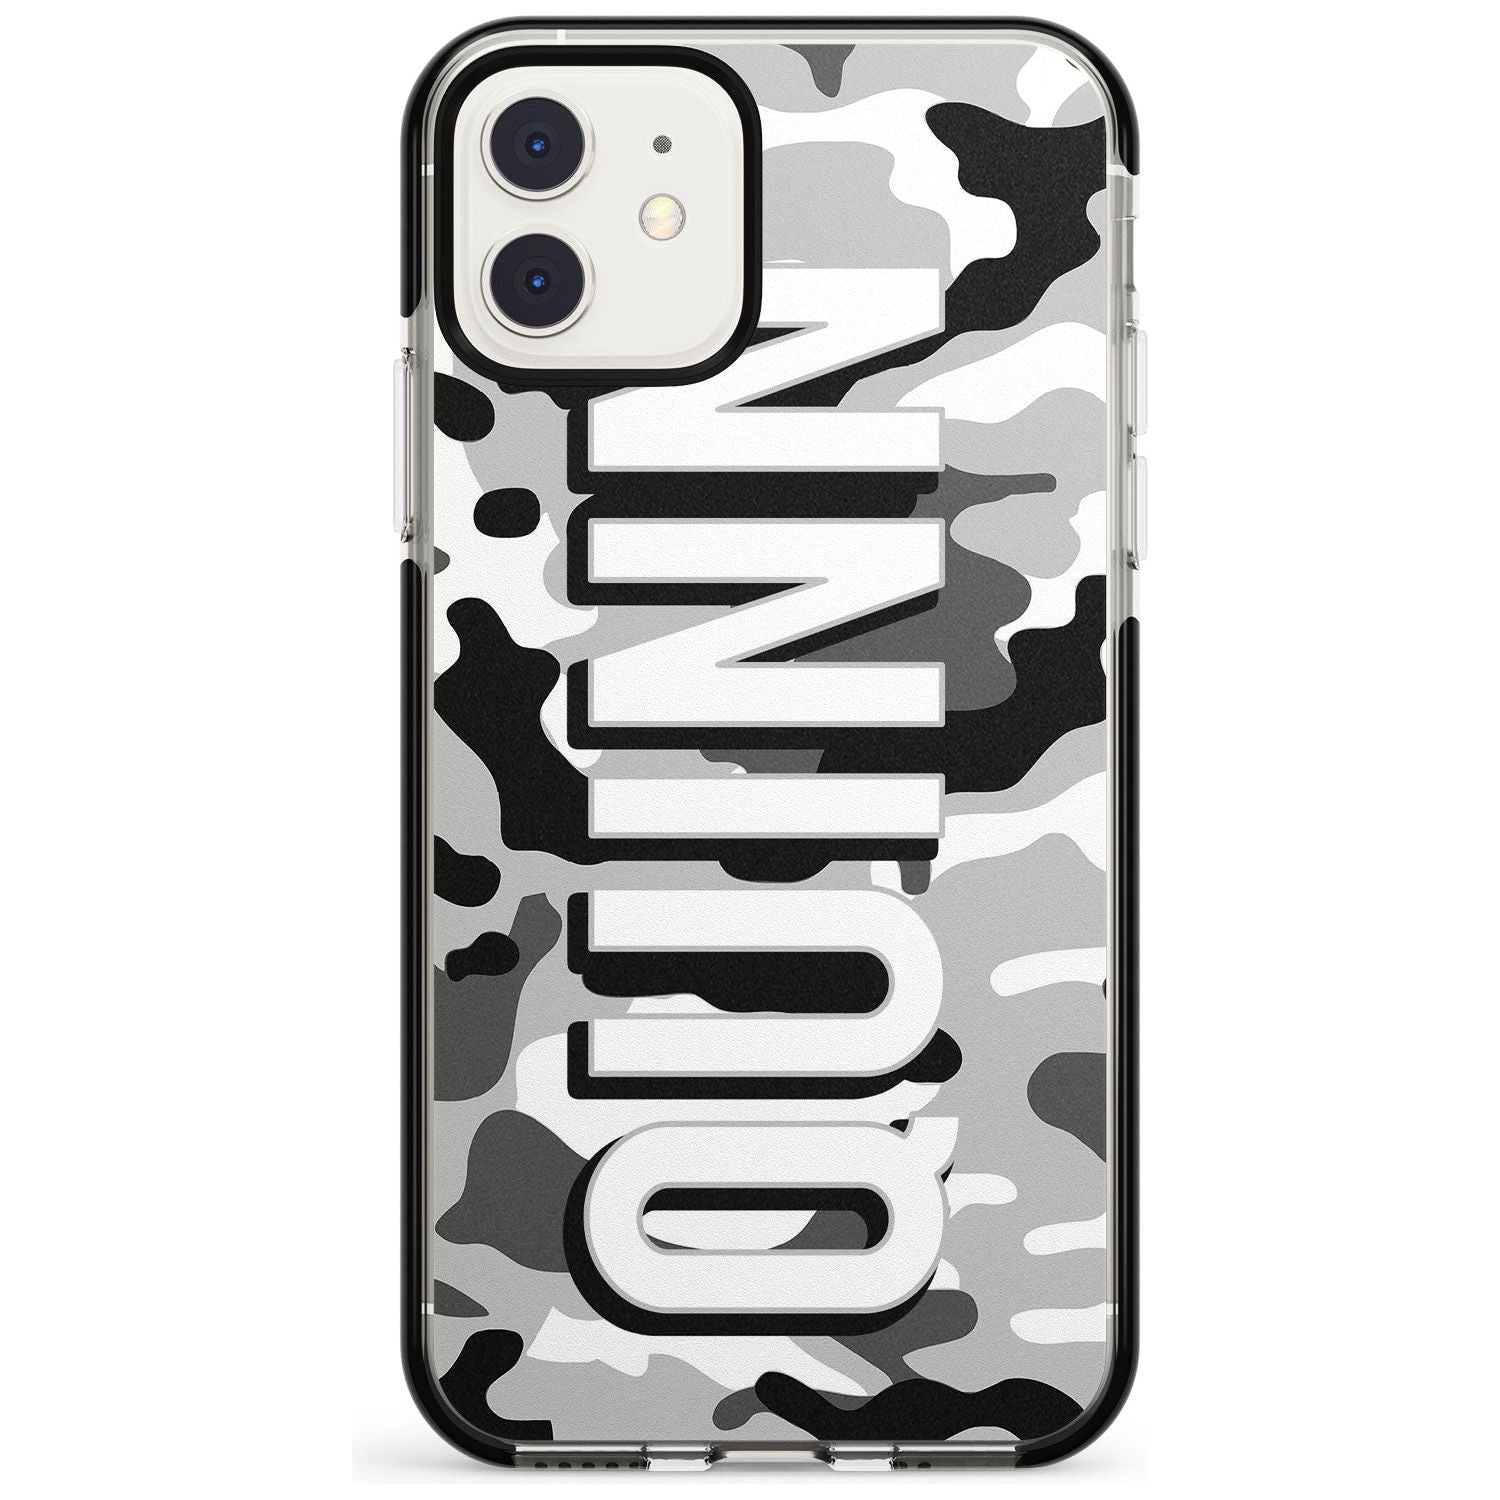 Greyscale Camo Pink Fade Impact Phone Case for iPhone 11 Pro Max